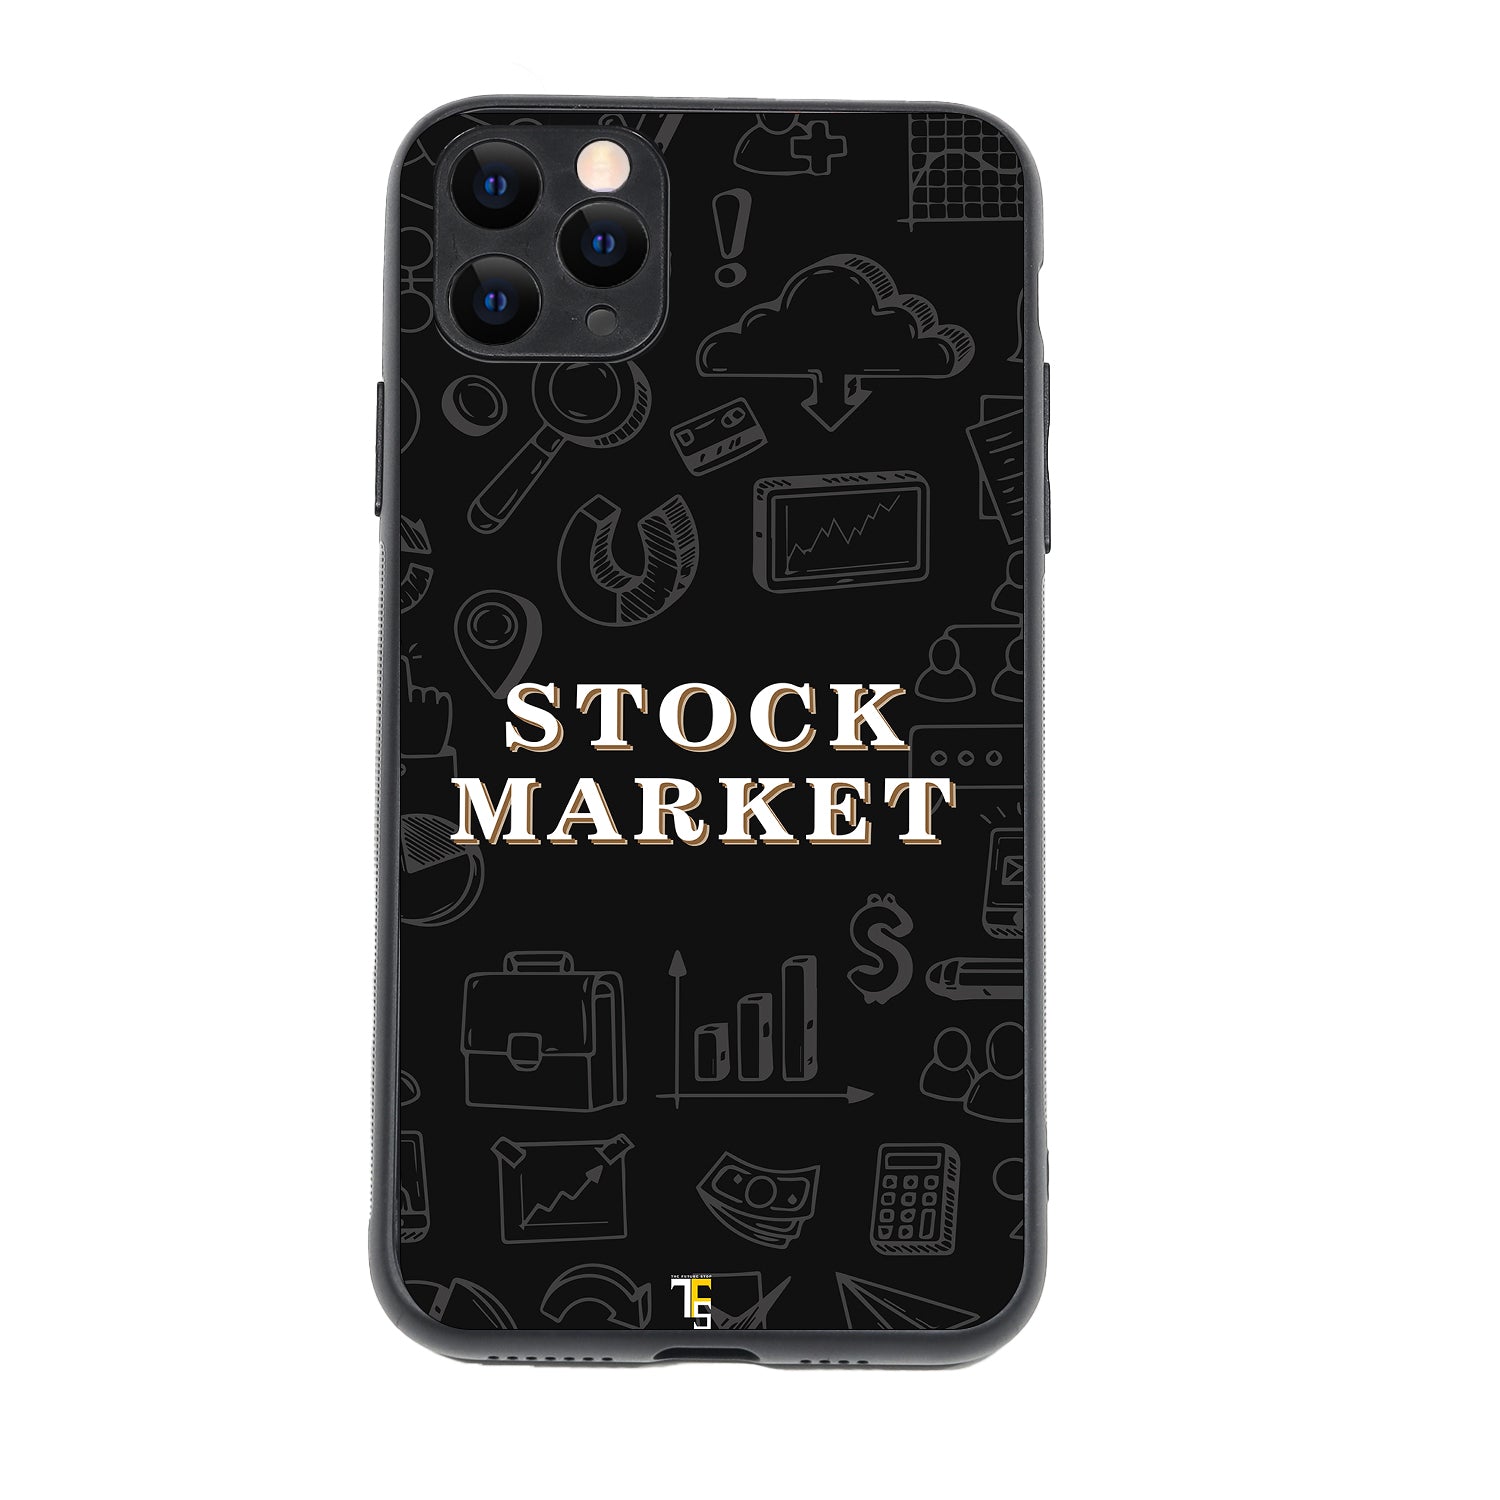 Stock Market Trading iPhone 11 Pro Max Case